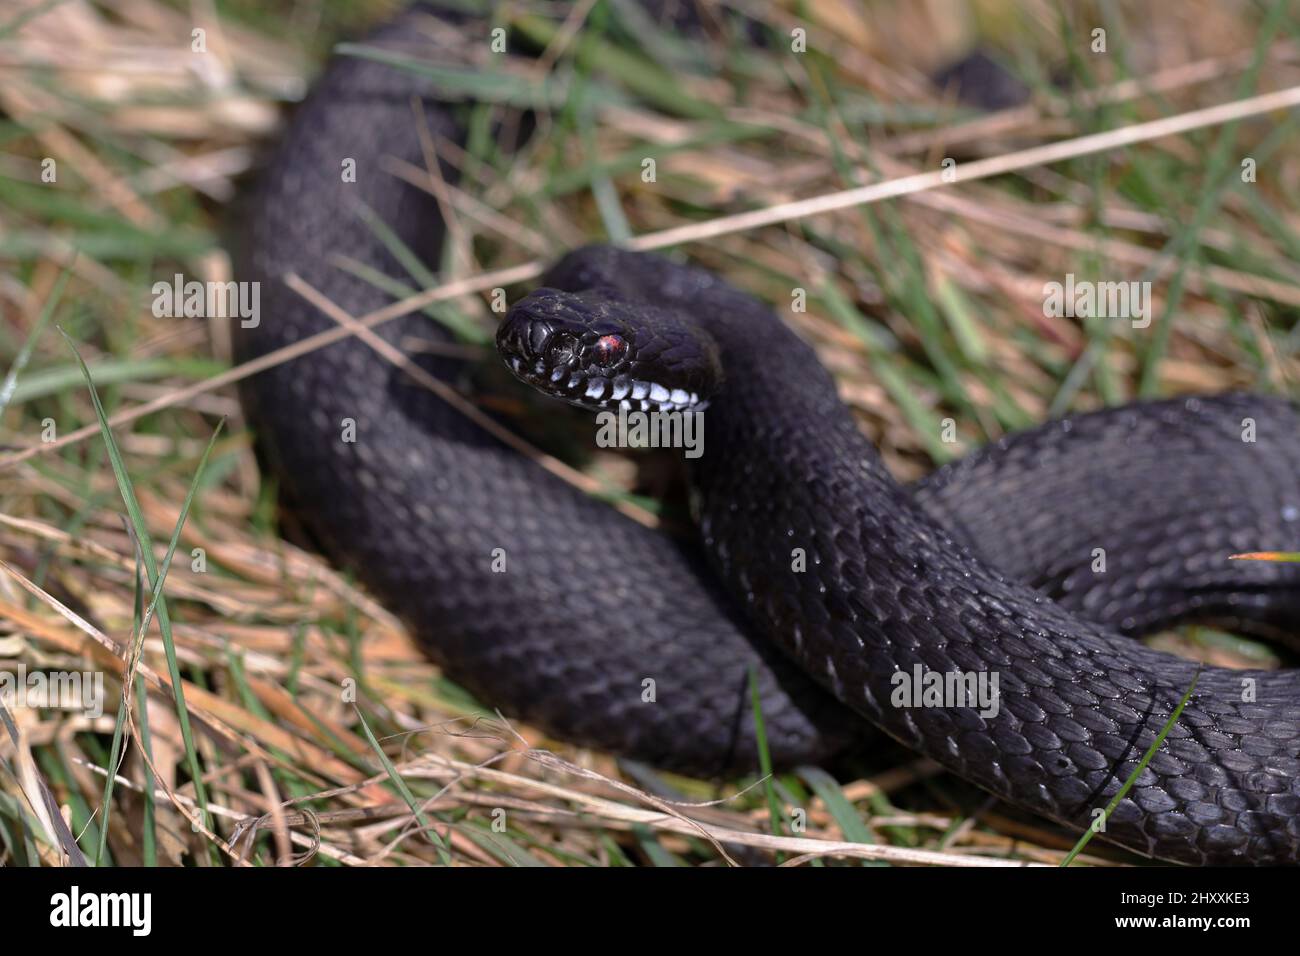 Vipera berus, the common European adder or common European viper, is a venomous snake that is extremely widespread. Stock Photo